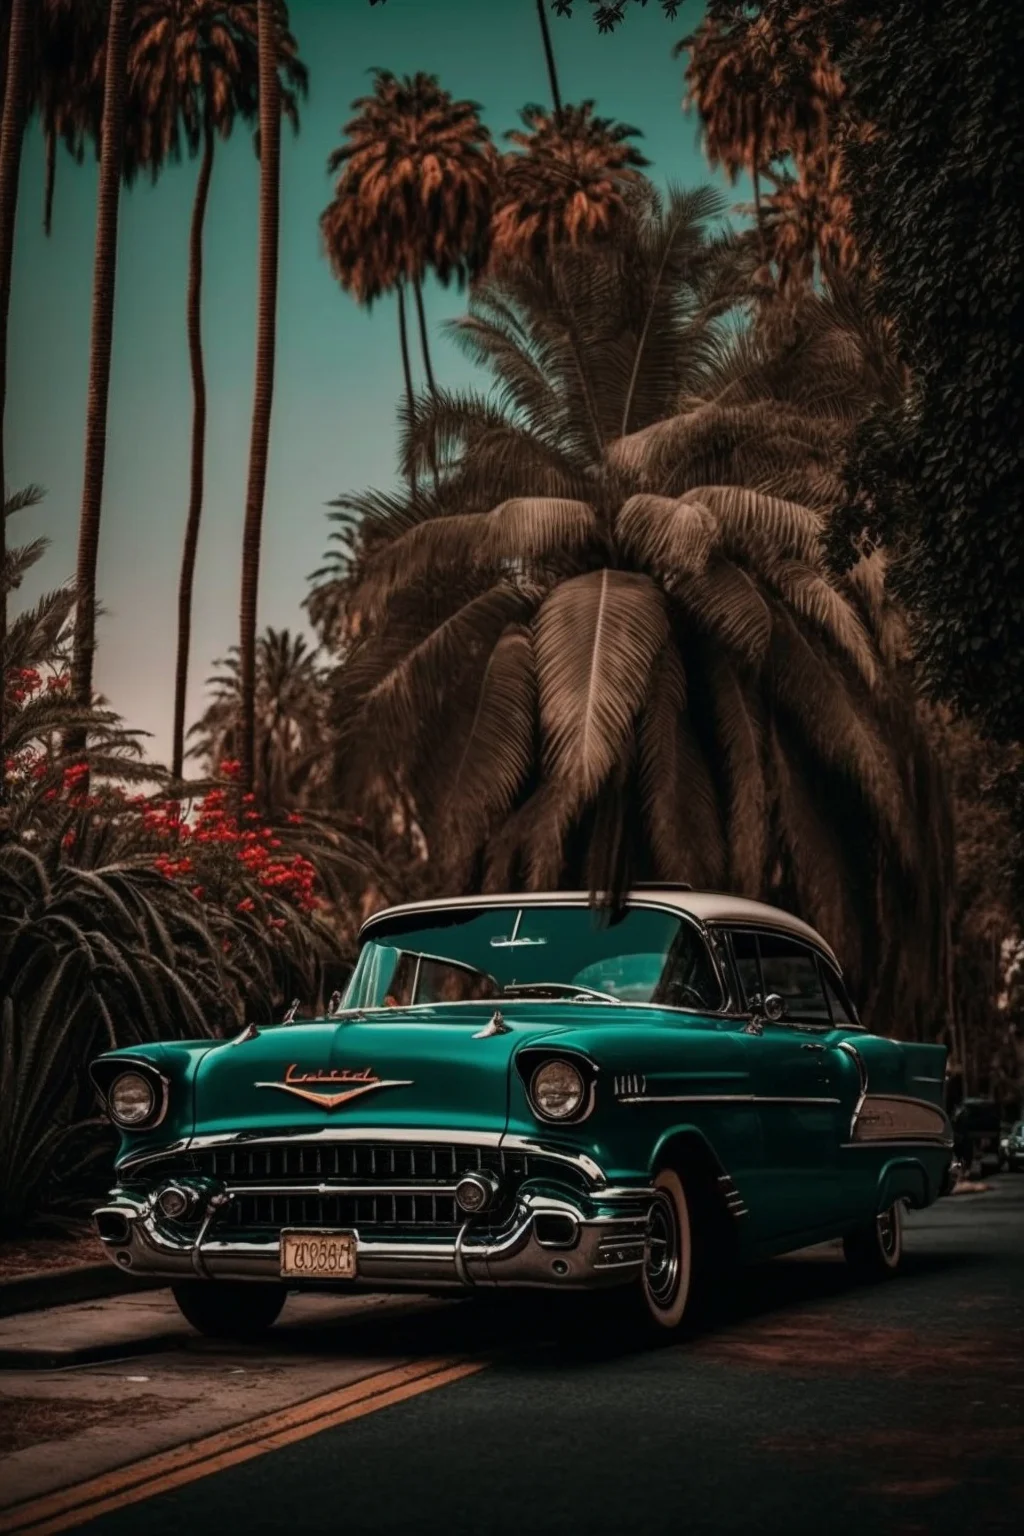 A green classic car parked on the side of the road with palm trees in the background. - Cars